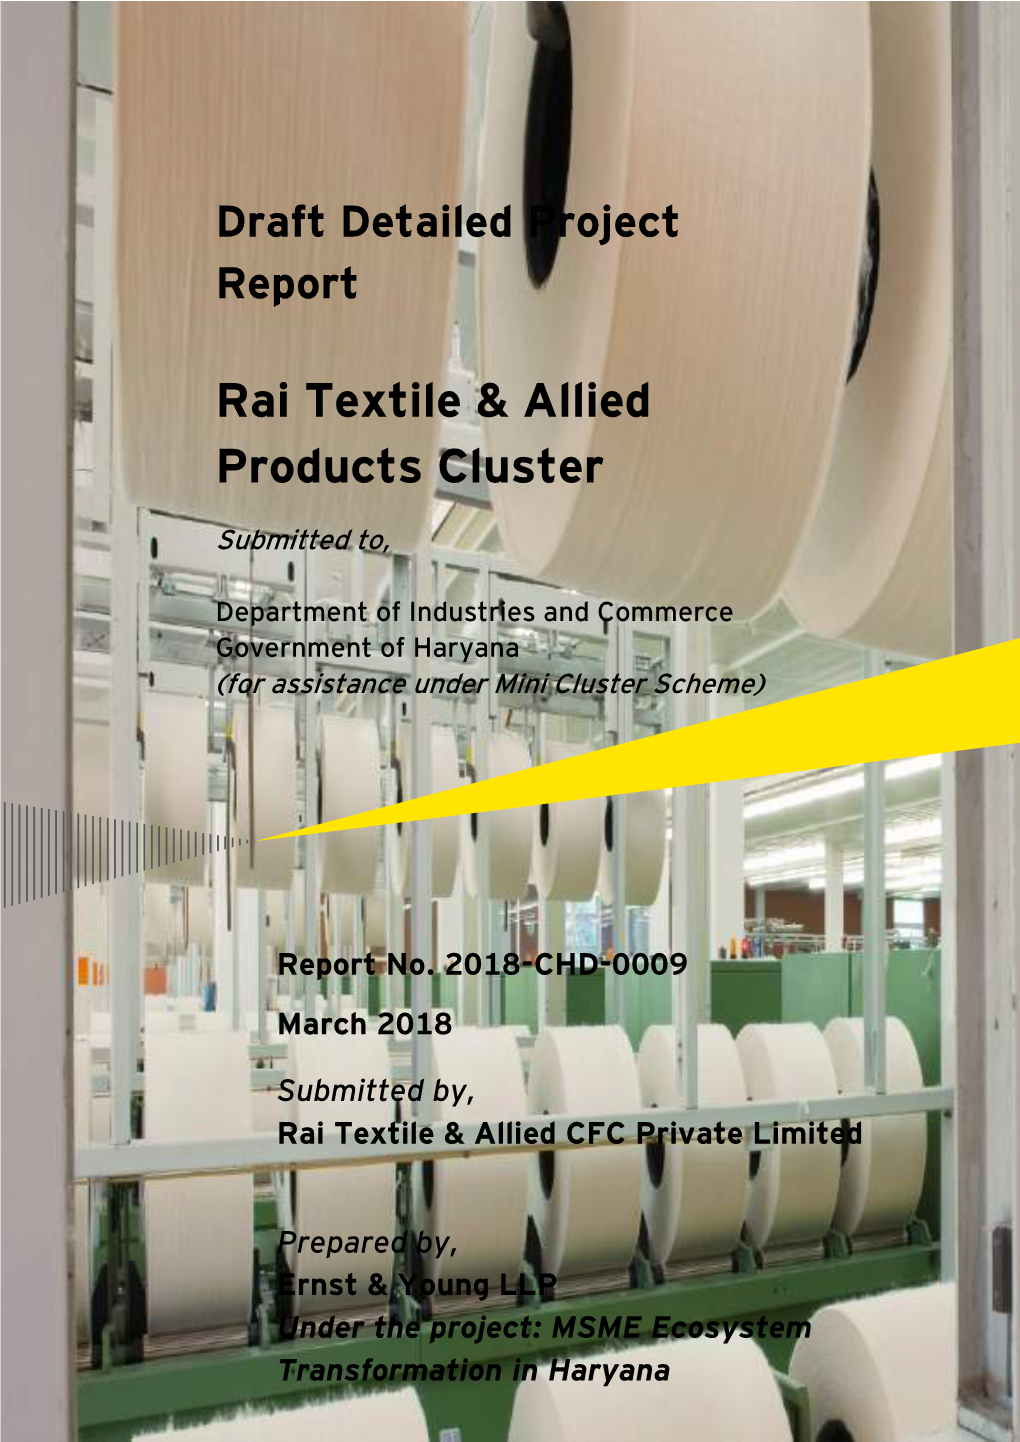 Rai Textile & Allied Products Cluster